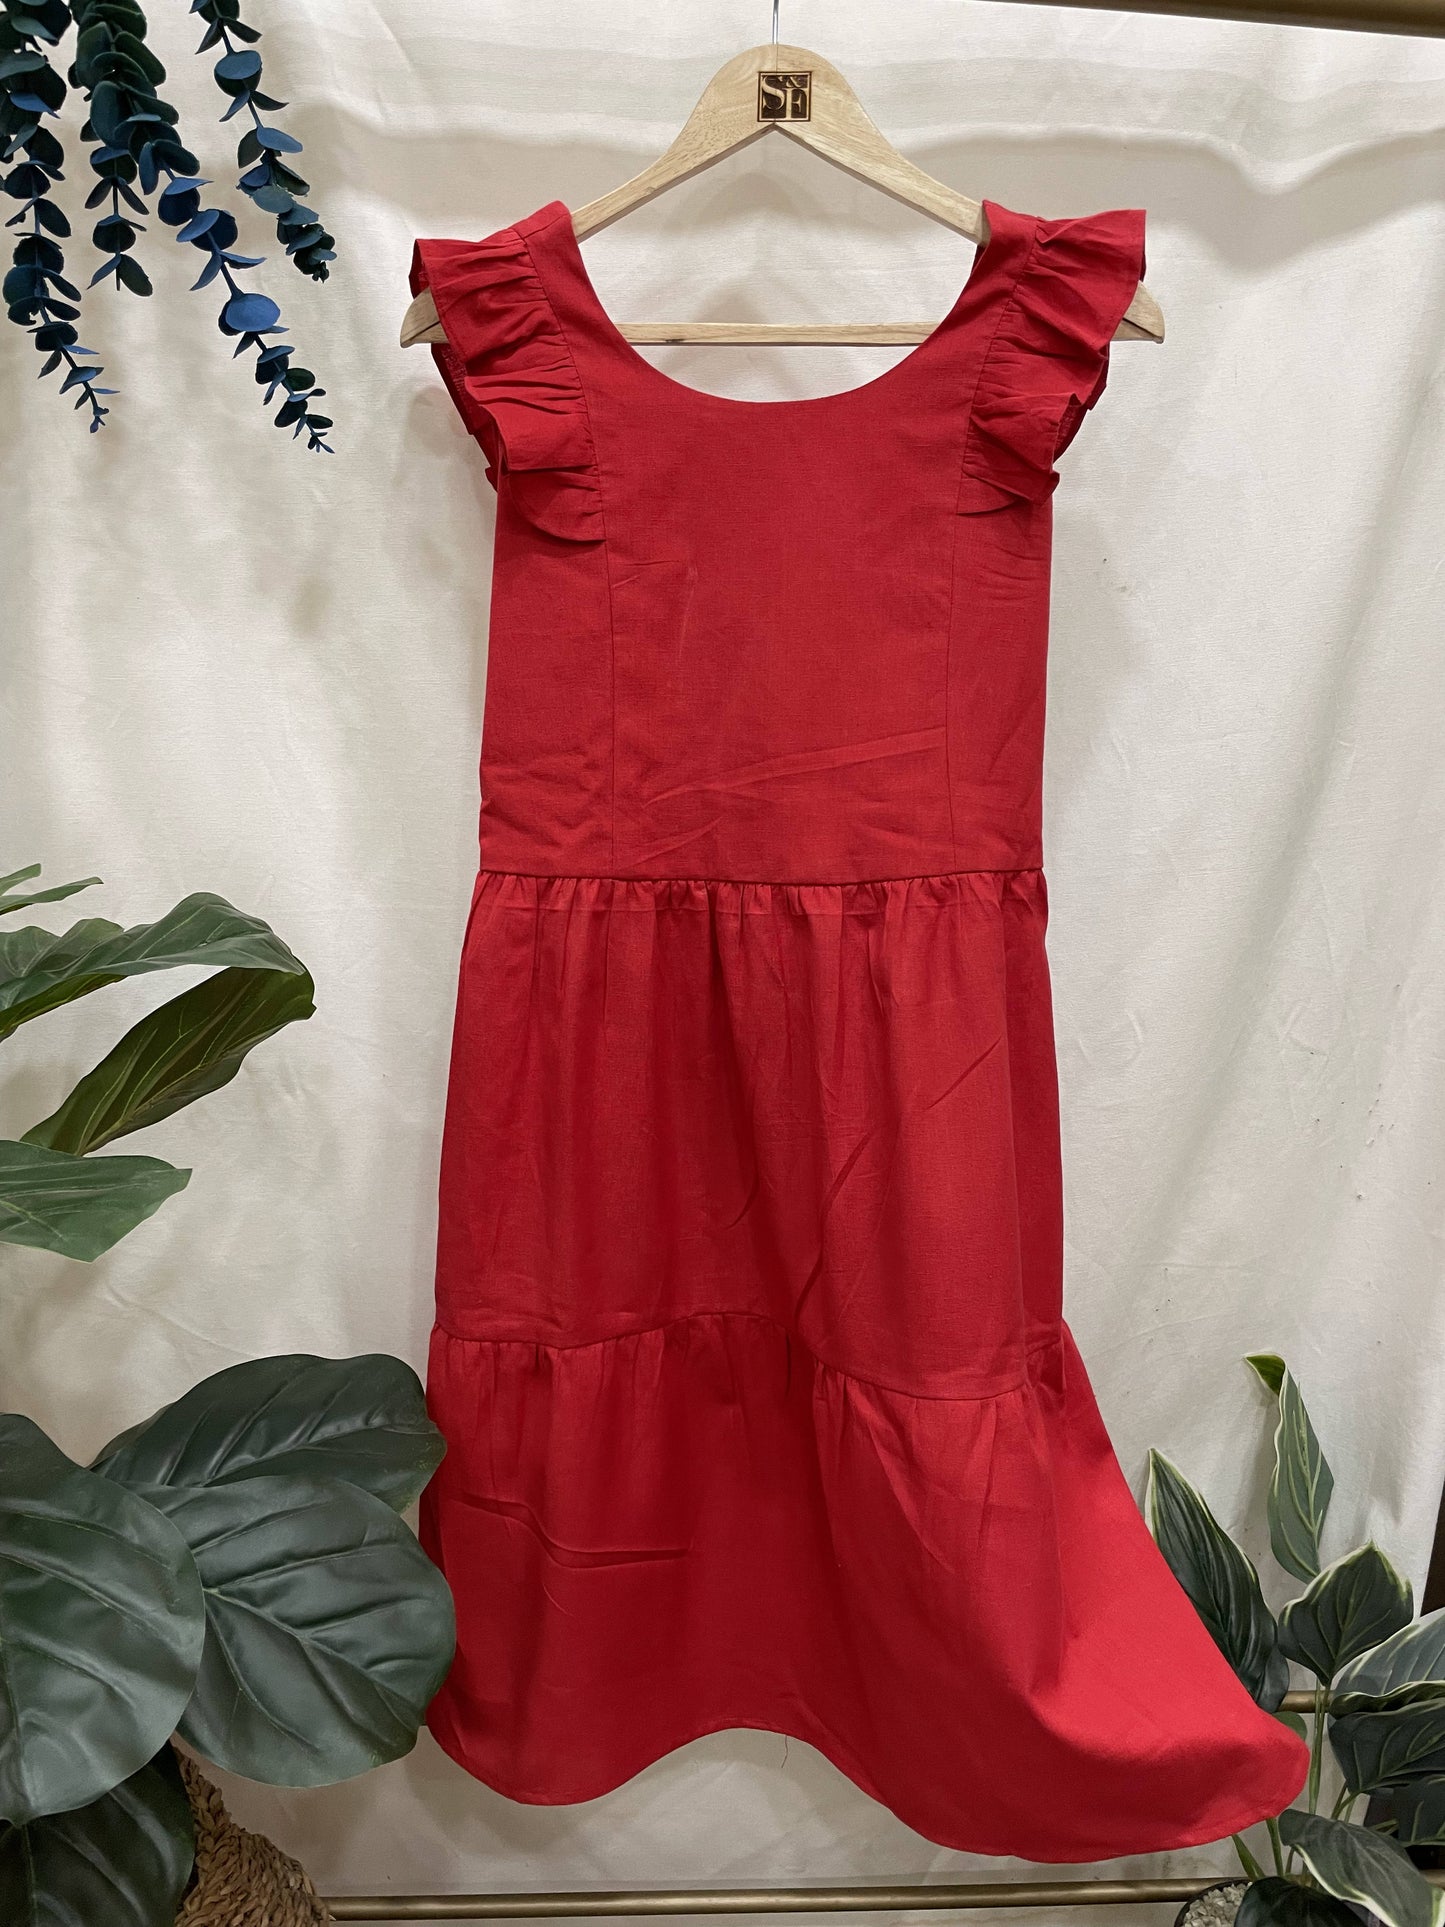 Women's Linen Cotton Red Brunch Outfits With Ruffle Sleeves-Brunch Dress